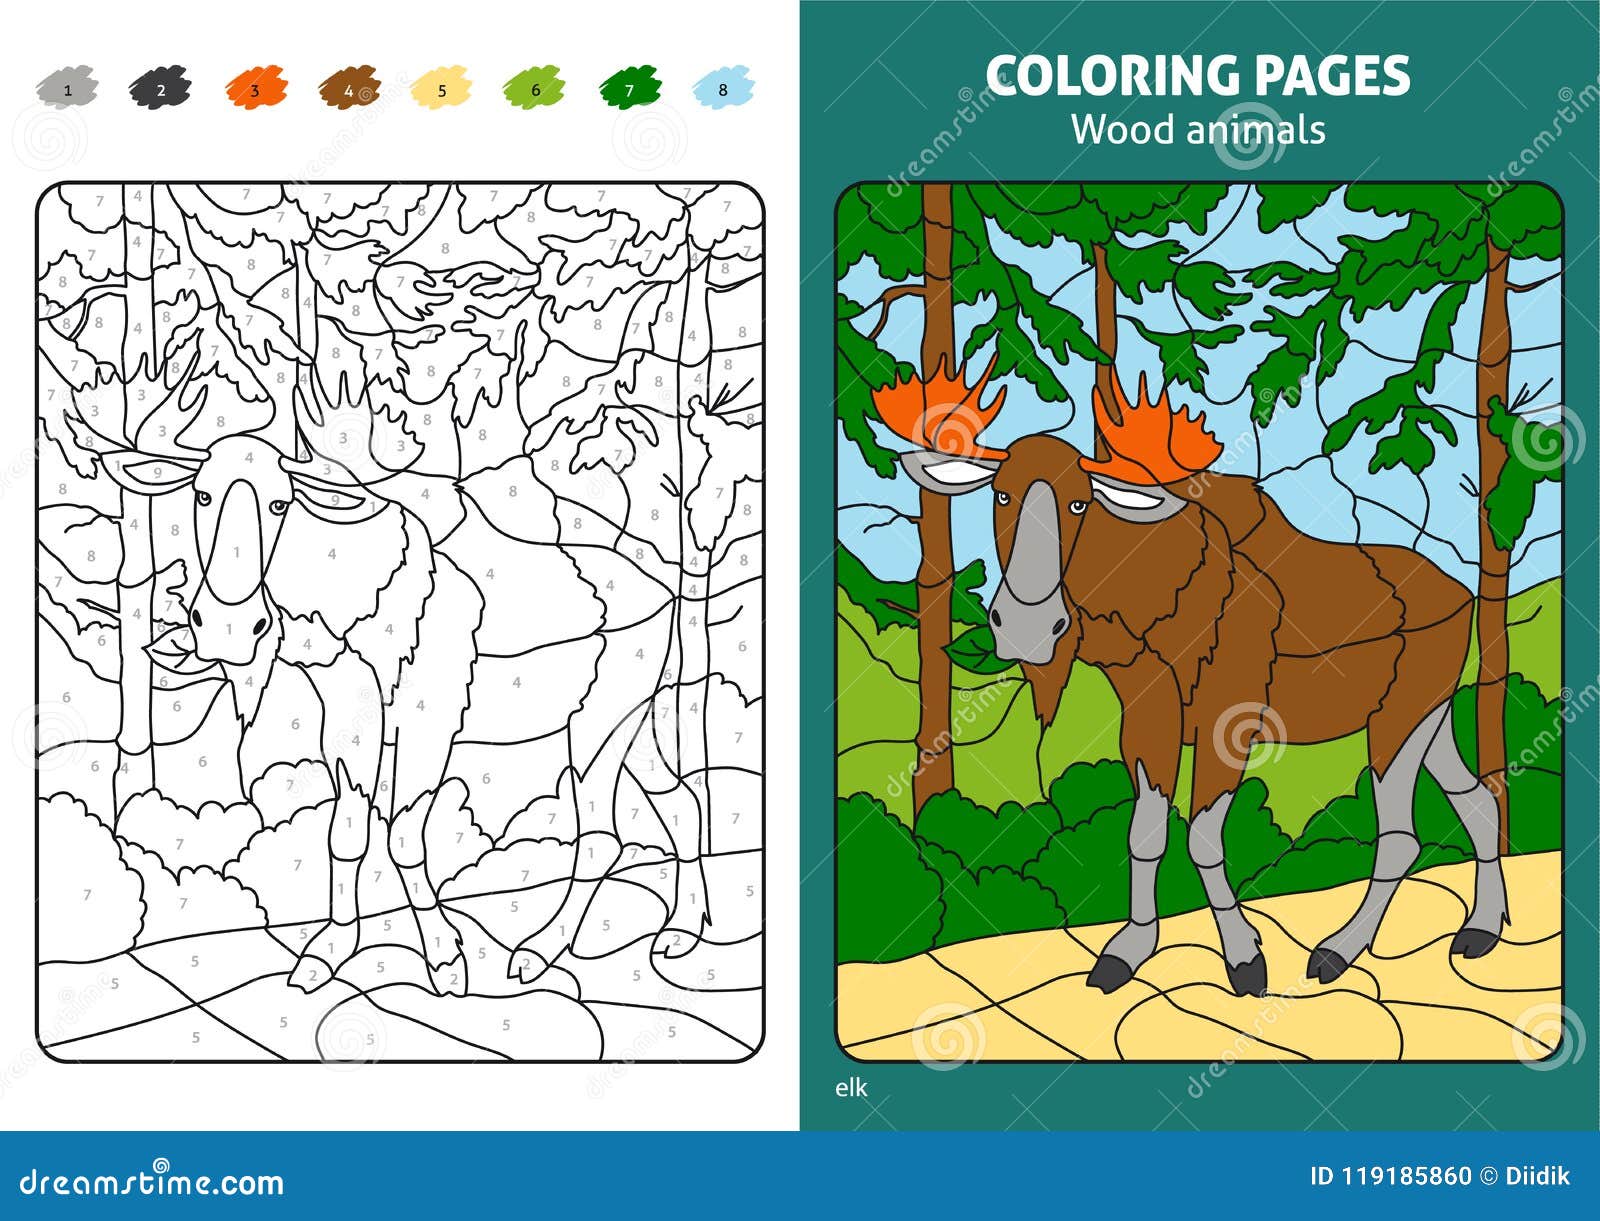 Wood Animals Coloring Page For Kids Elk In Forest Stock Vector Illustration Of Book Number 119185860